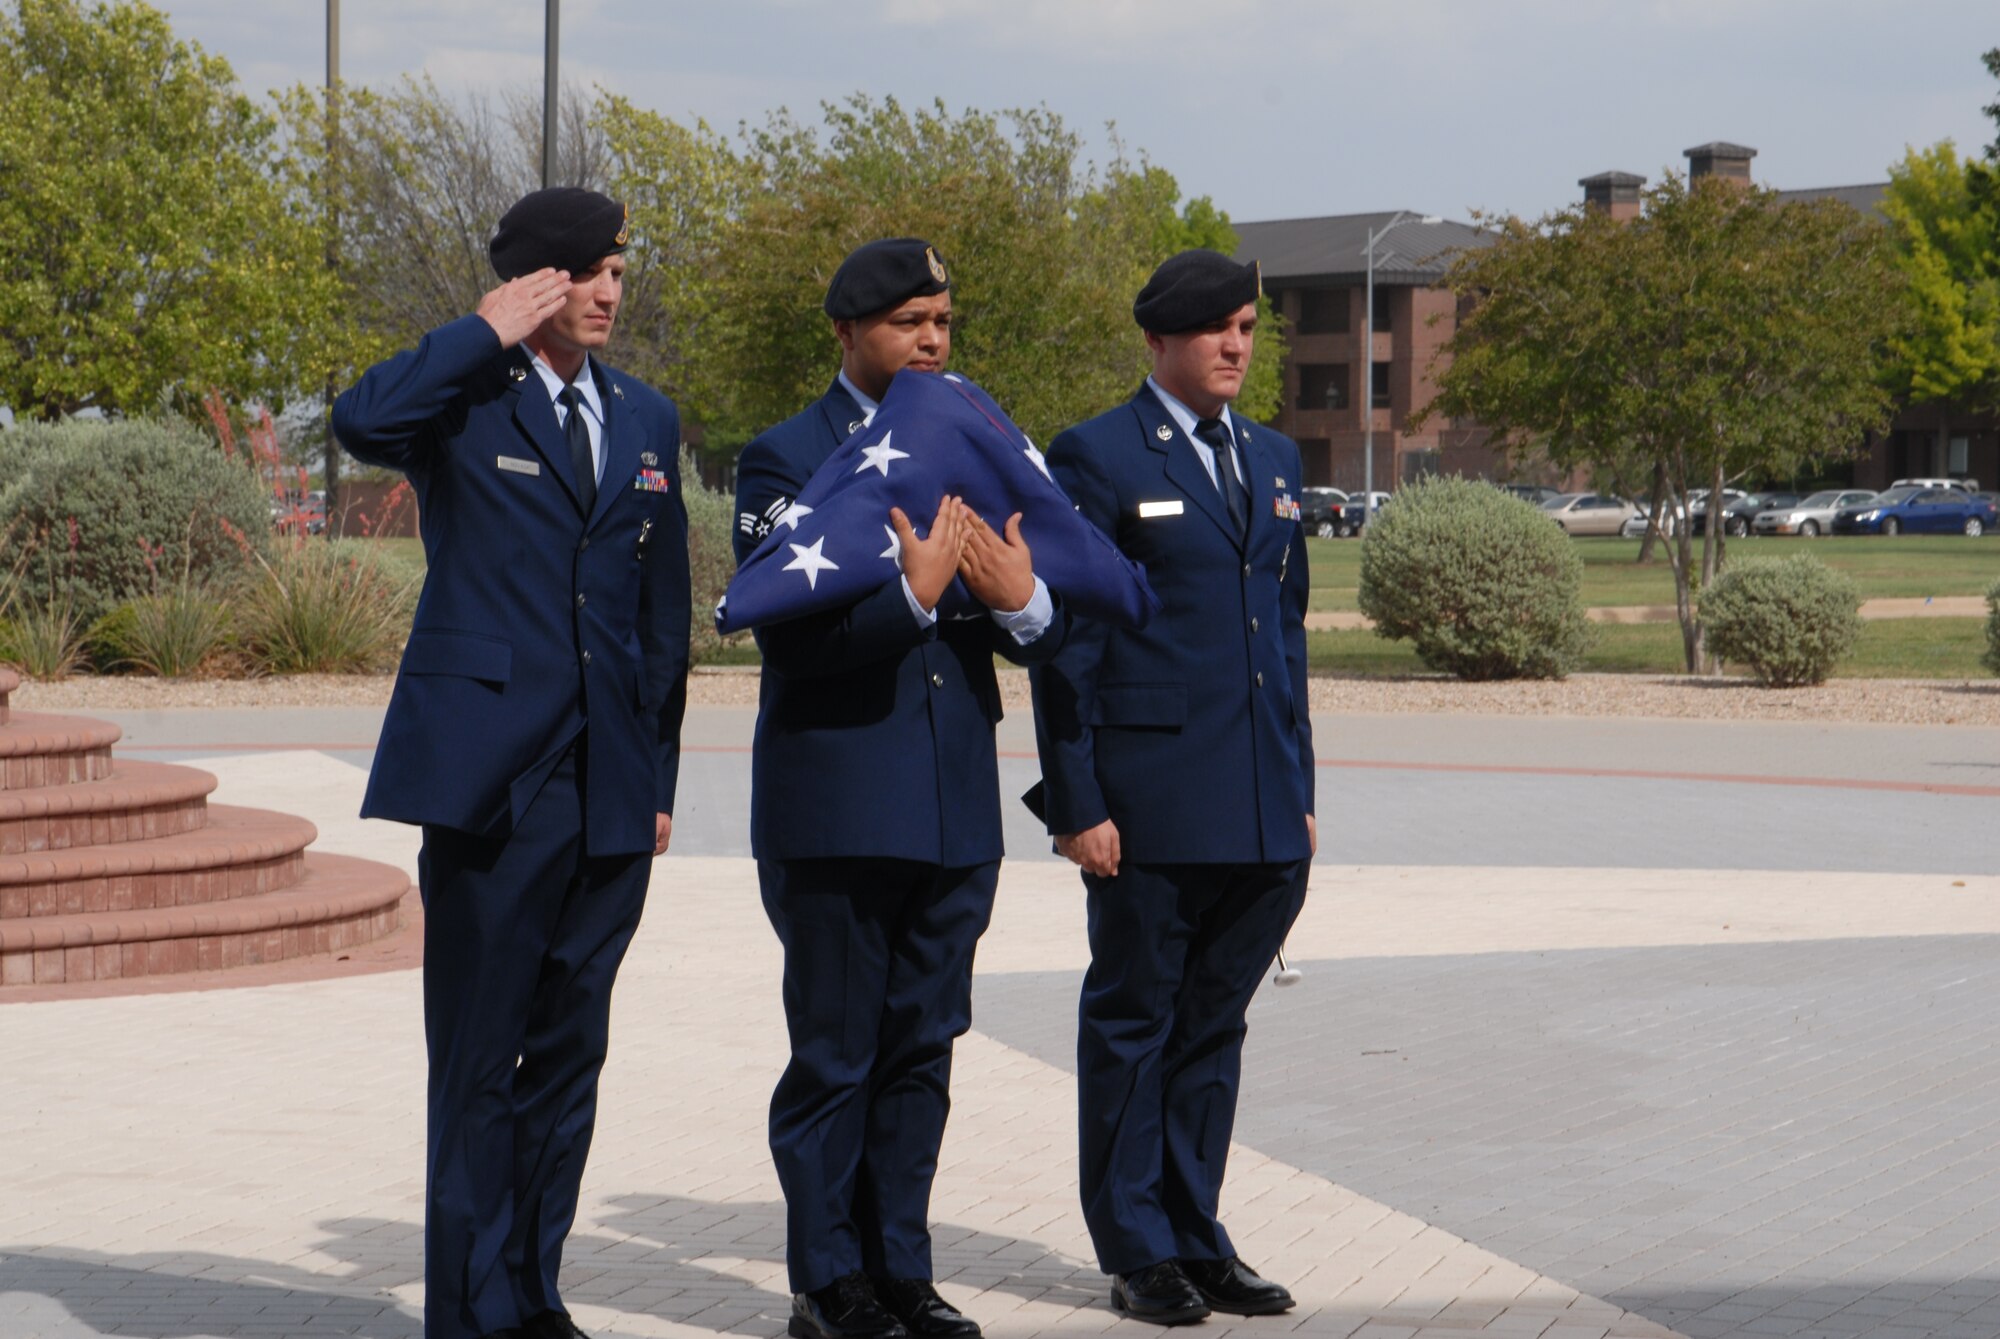 GOODFELLOW AIR FORCE BASE, Texas – Service members from the 17th Security Forces Squadron retire the colors during the retreat ceremony at the Norma Brown building, May 17. Security Forces held different events and activities to commemorate Peace Officers Memorial Day and Police week from May 13 to 17. (U.S. Air Force photo/ Airman 1st Class Breonna Fields)  

